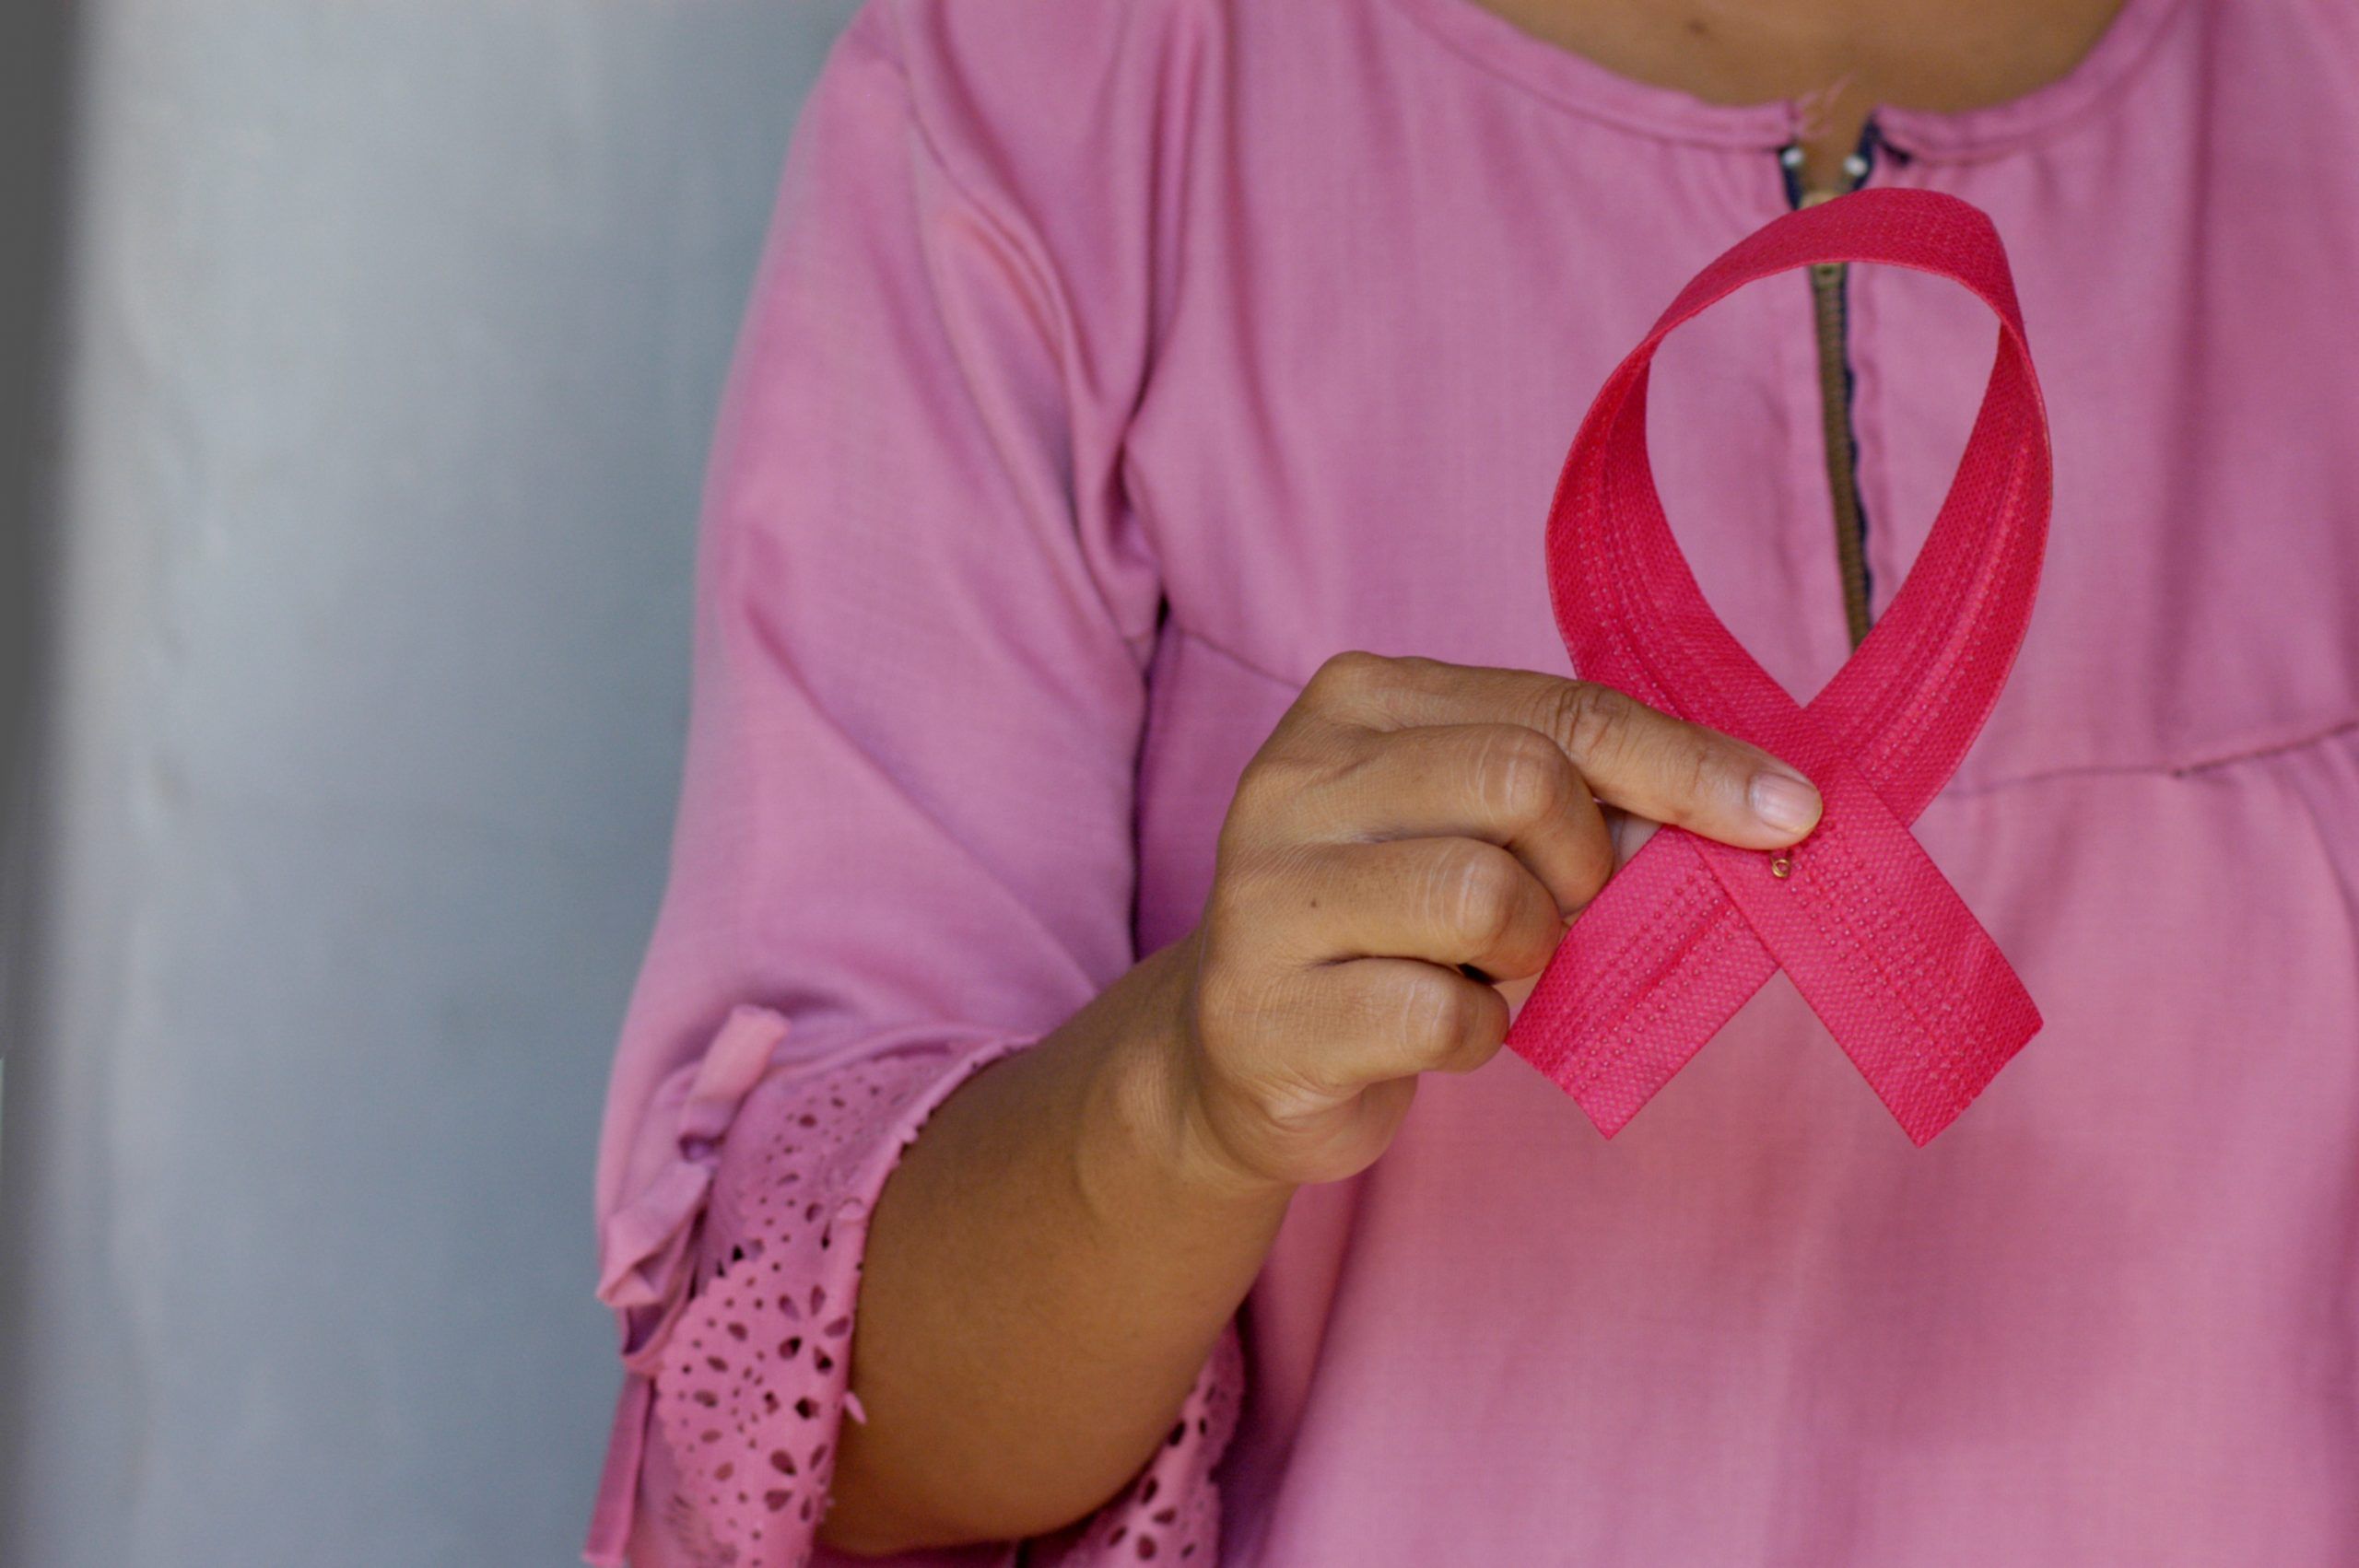 7 Myths about Breast Cancer